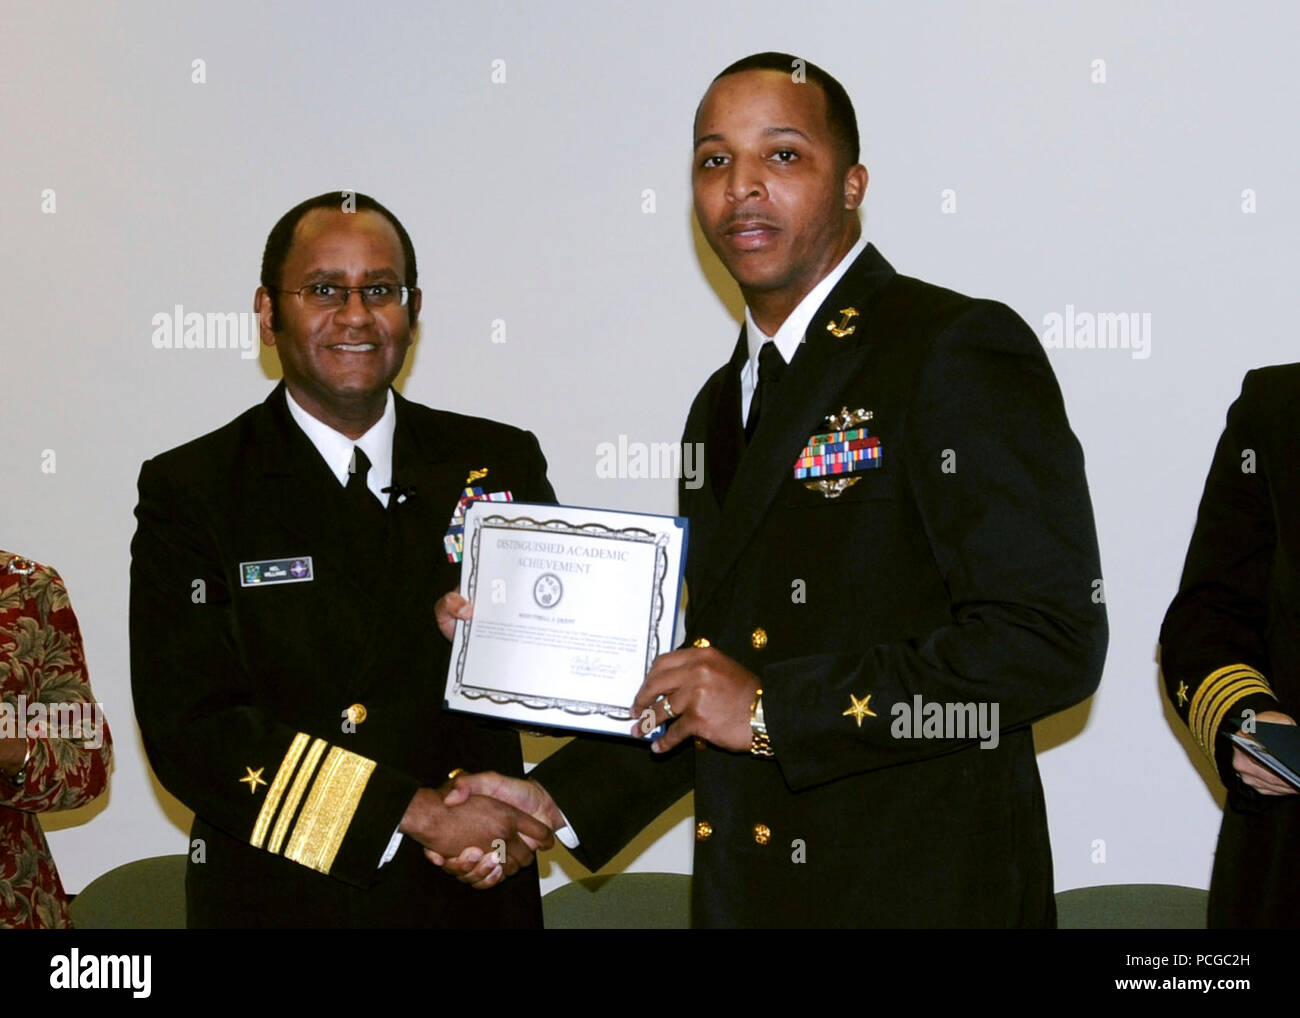 .NORFOLK (Feb. 9, 2009) Officer Candidate Tyrell Grant receives the Distinguished Academic Award from Vice Adm. Mel Williams Jr., commander of U.S. 2nd Fleet during an awards ceremony in celebration of Black History Month. Grant, formerly an active-duty Electronics Technician 1st Class, received the award for having a grade point average of 3.81 for the Fall 2008 semester. Stock Photo